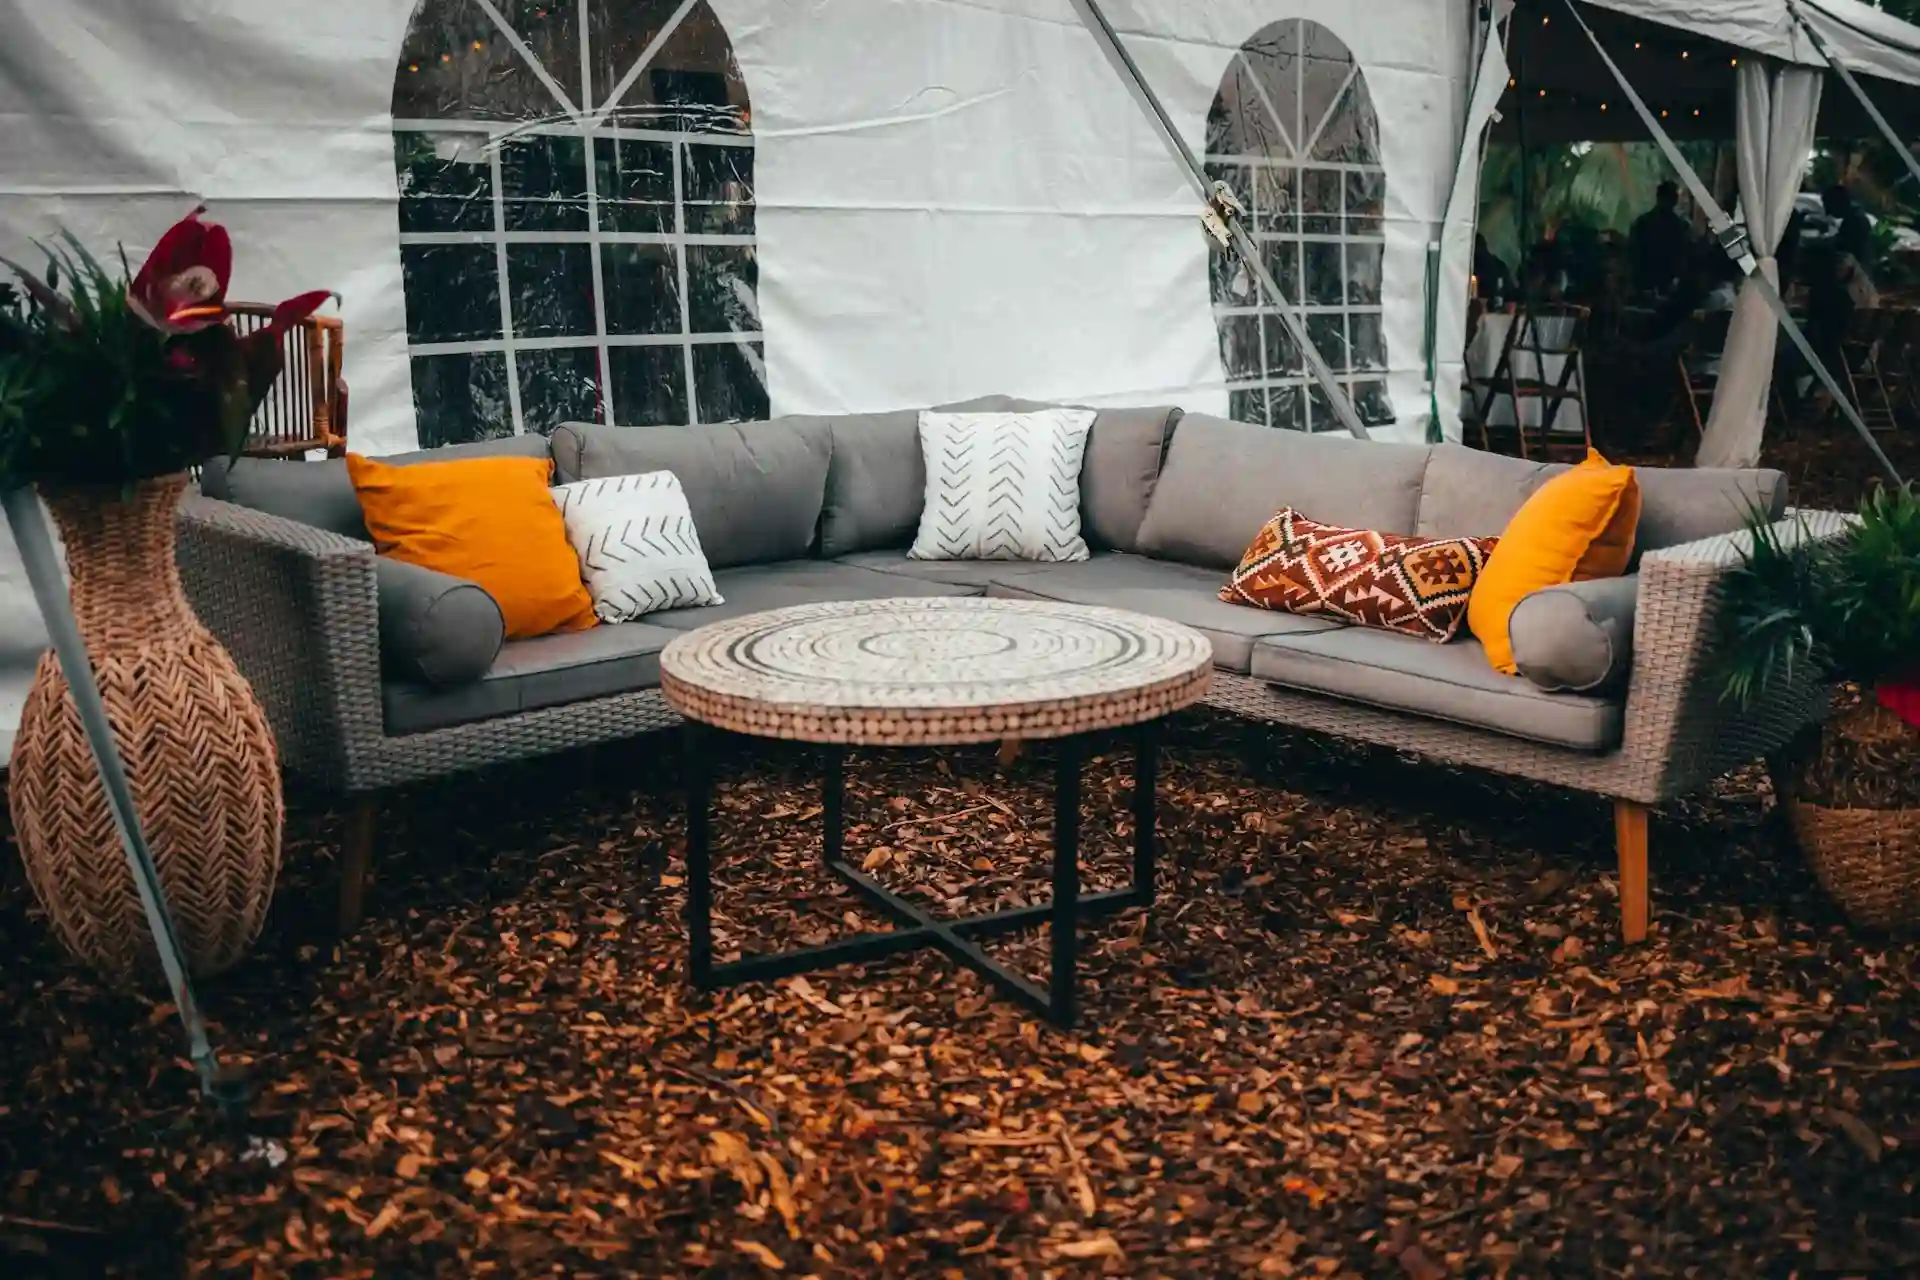 How to Choose the Best Outdoor Fabric for Cushions